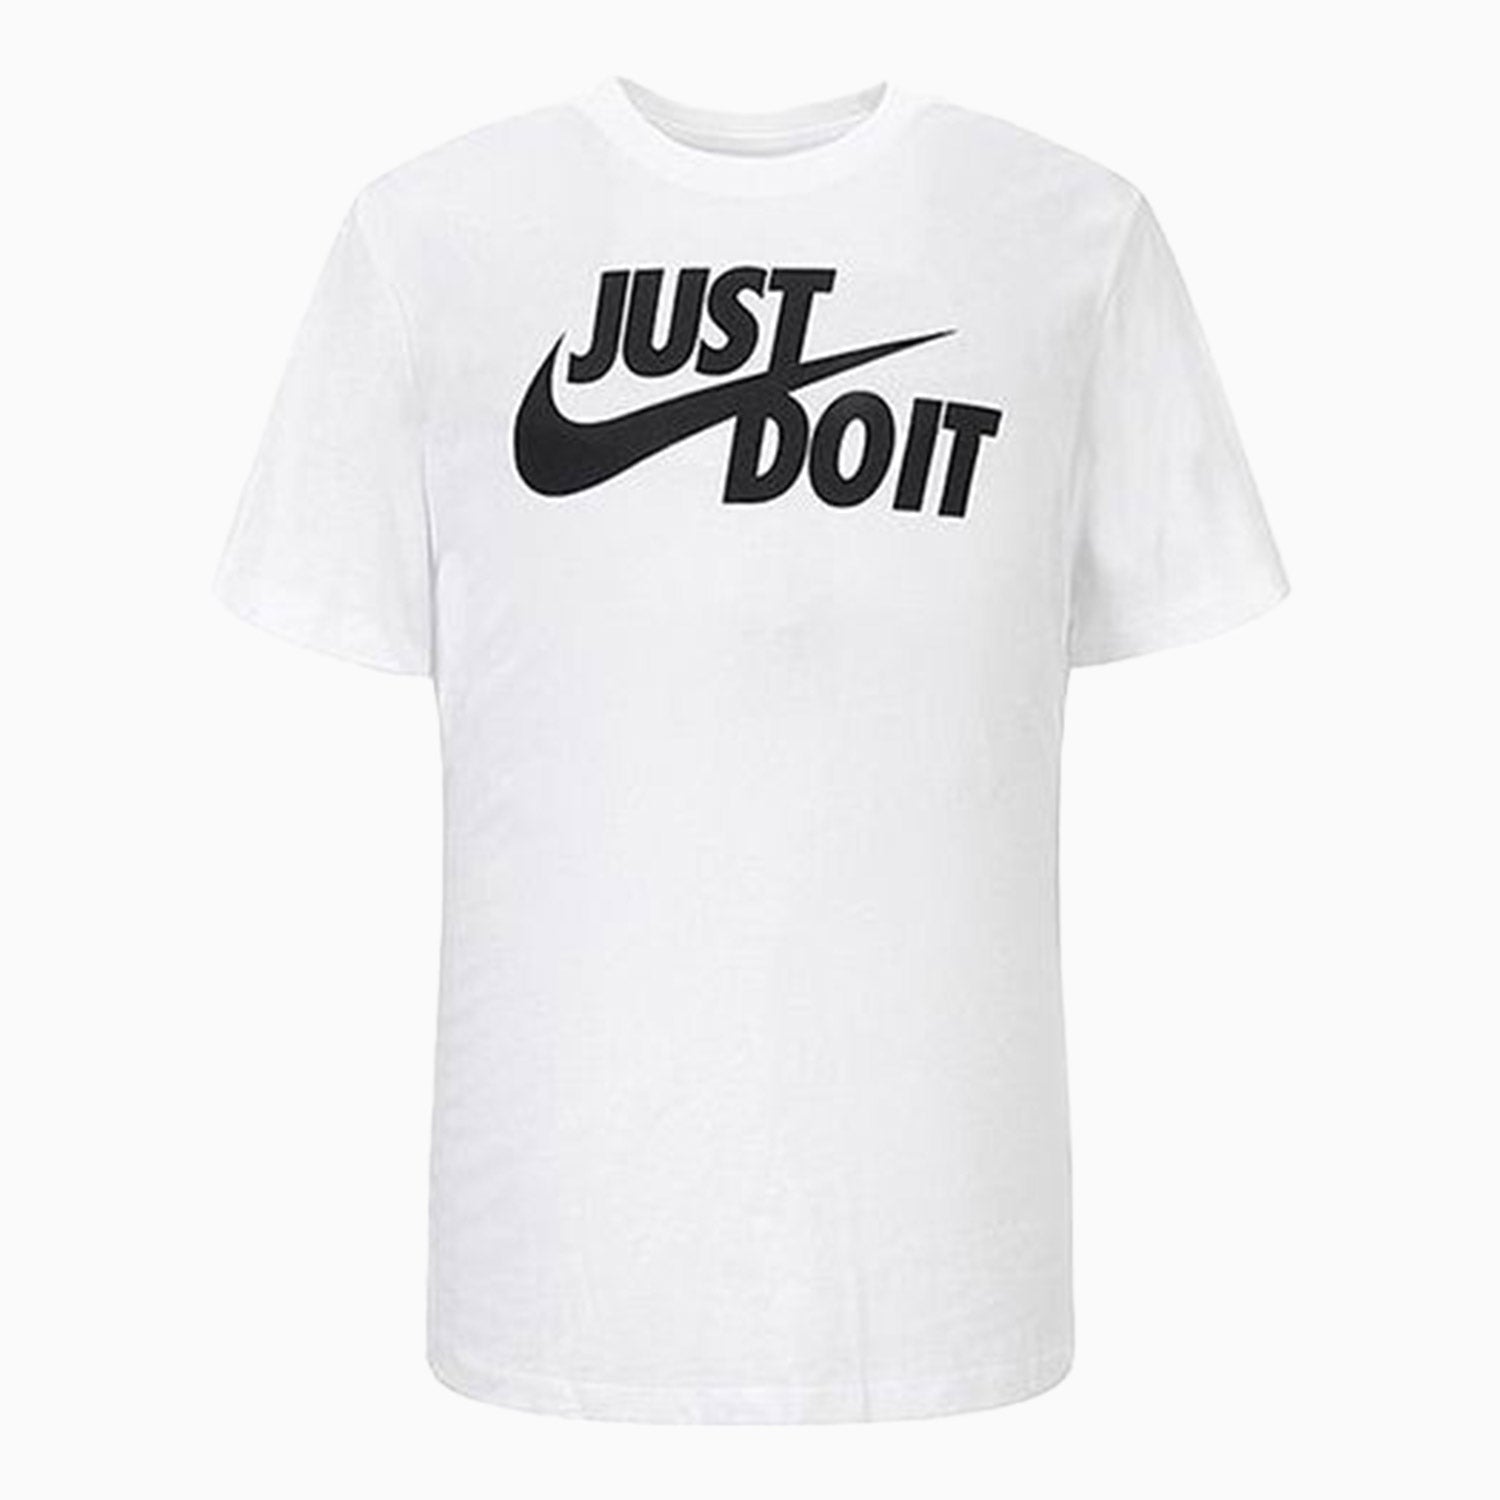 nike-mens-sportswear-t-shirt-and-shorts-outfit-ar5006-100-dx0731-100